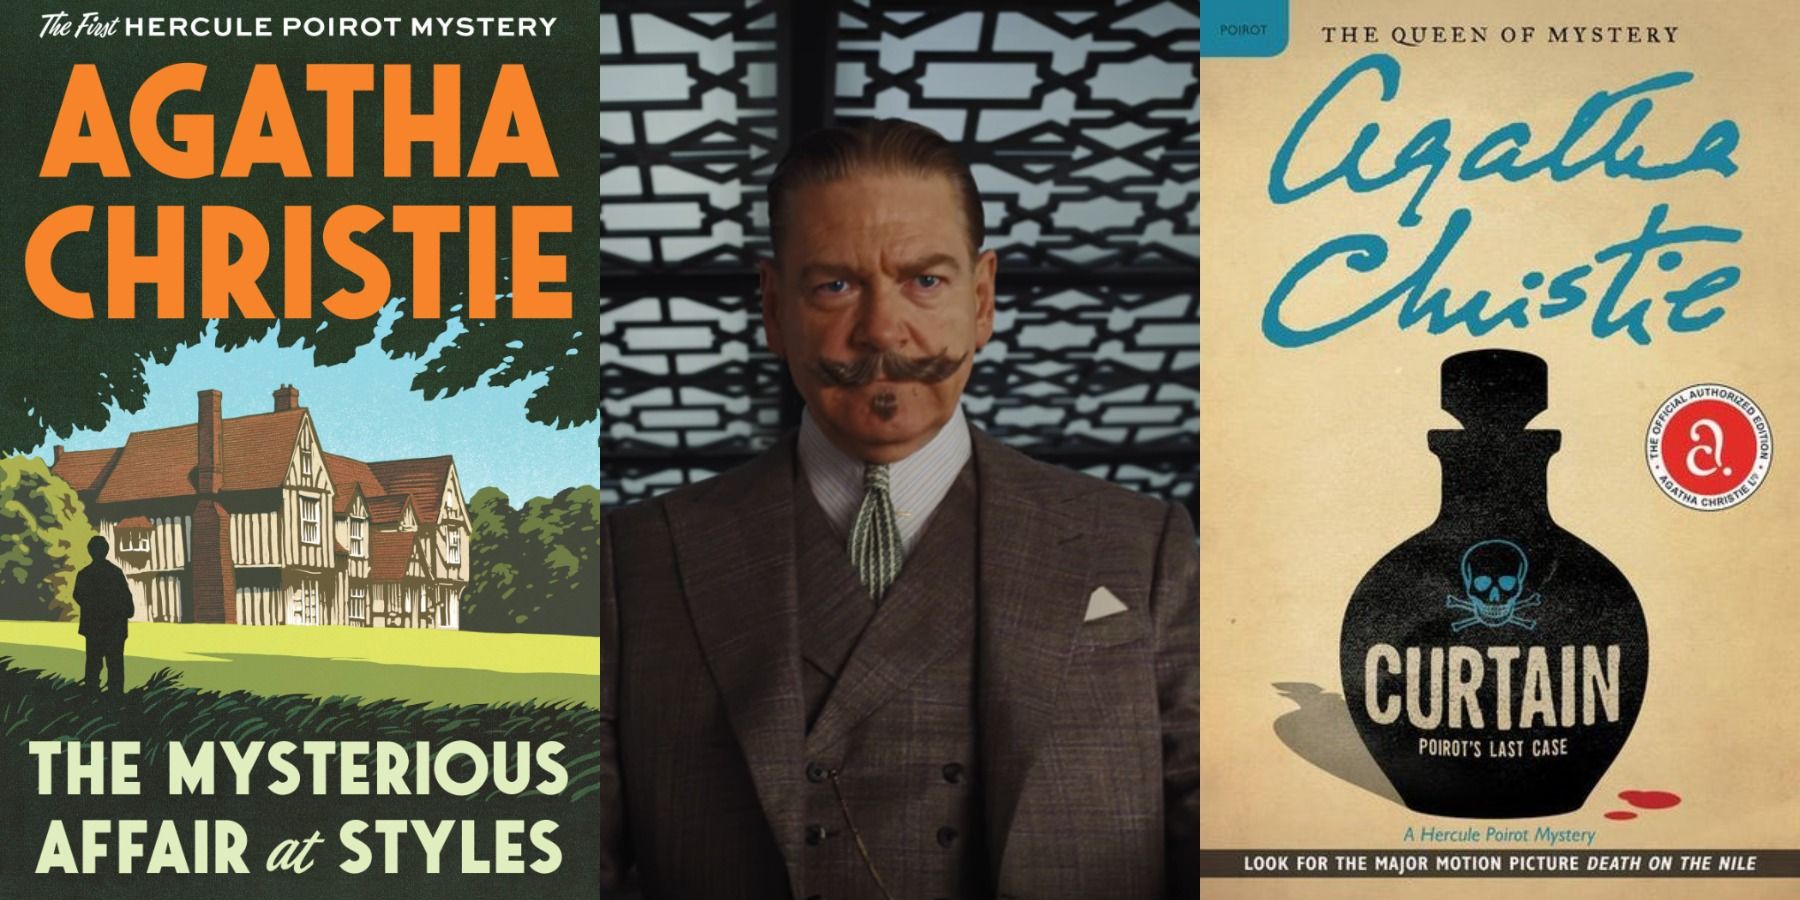 Mysterious Affair at Styles, Kenneth Branagh's Poirot, and Curtain.